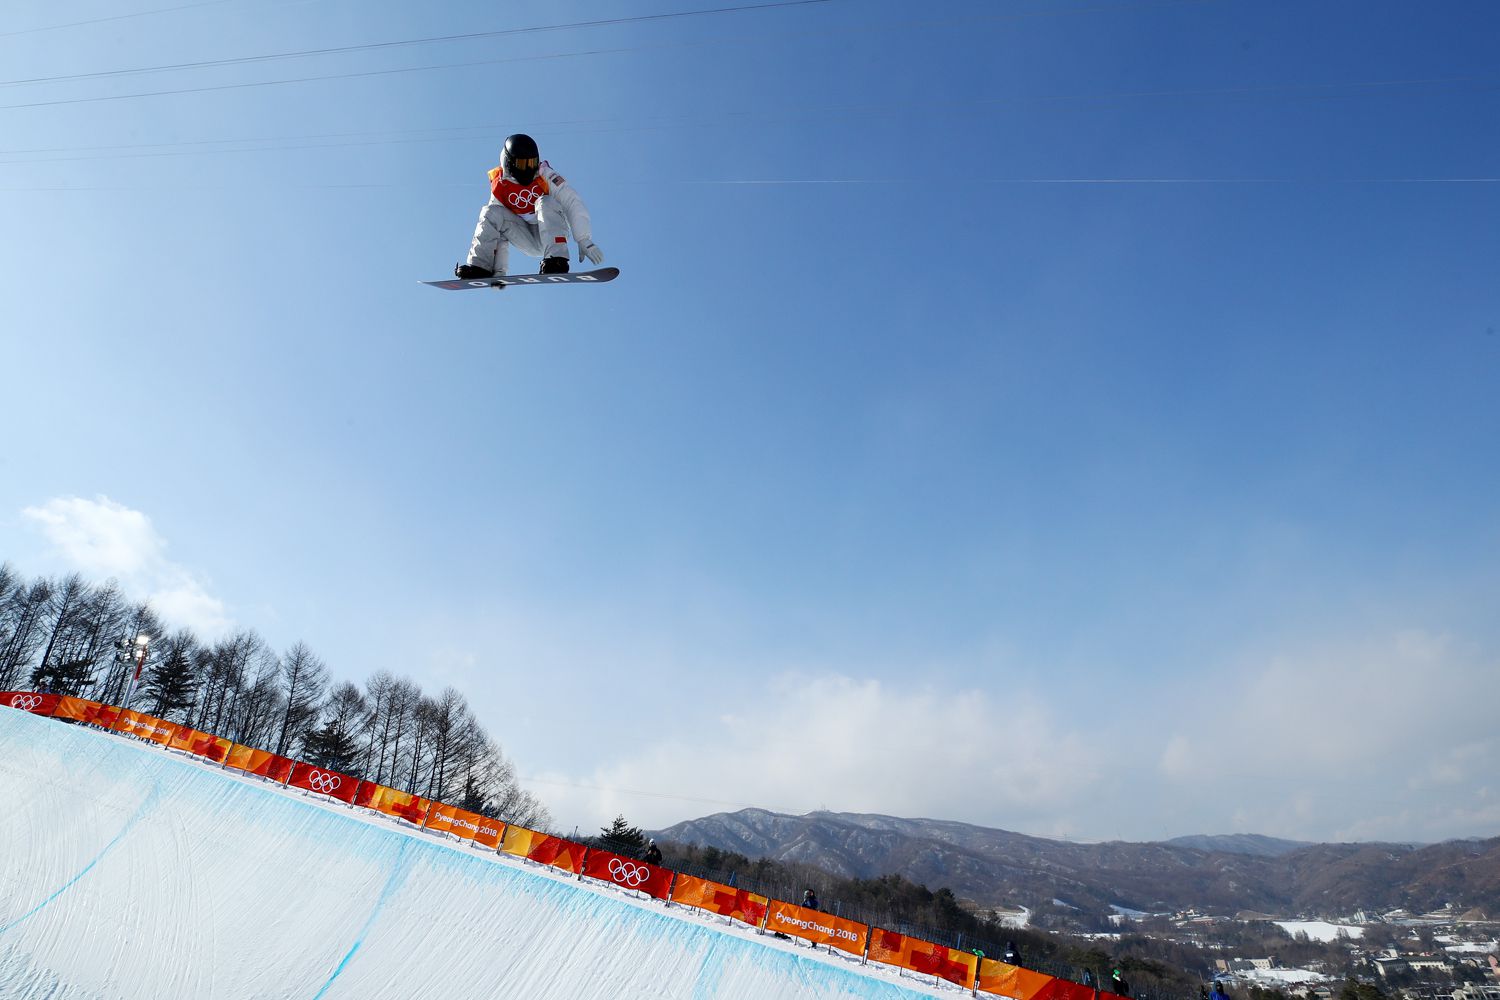 Shaun White of the United States competes during the Snowboard Men's Halfpipe Qualification on day four of the PyeongChang 2018 Winter Olympic Games